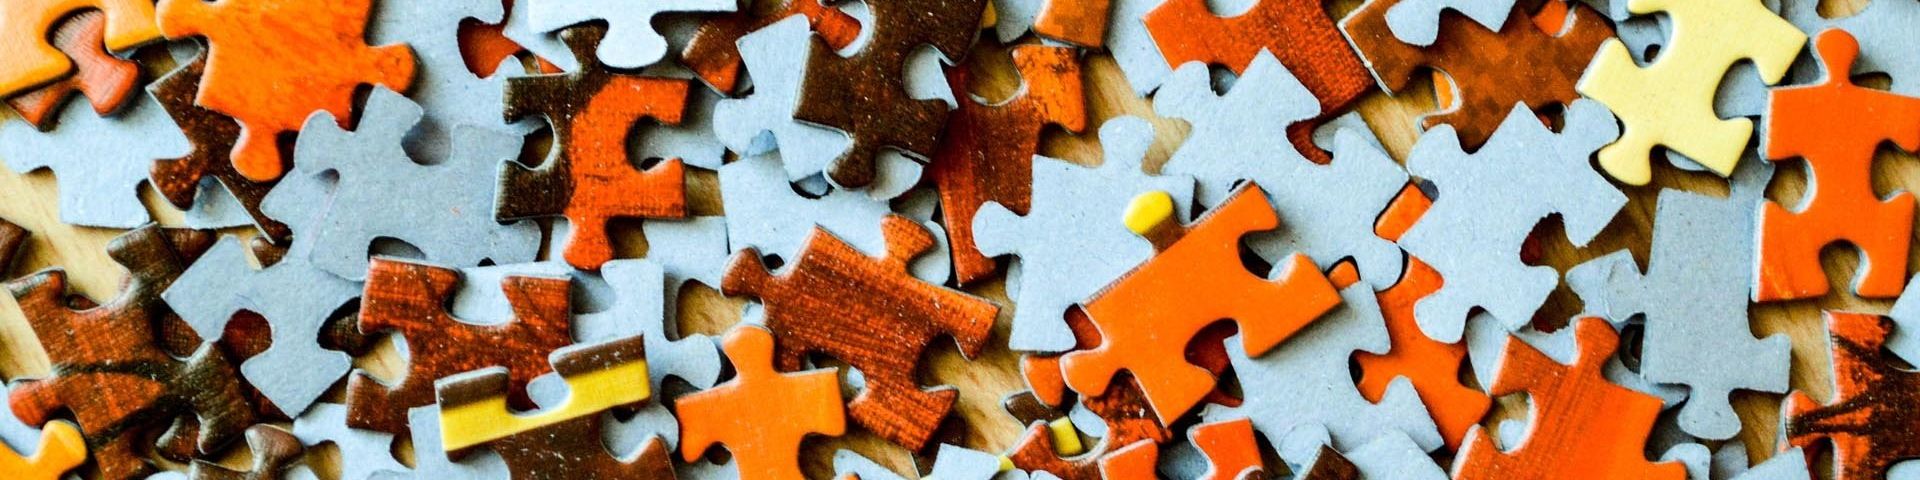 The pieces of a jigsaw puzzle, orange and brown pieces, mixed up with others that are face down, showing only the grey cardboard on their reverse.